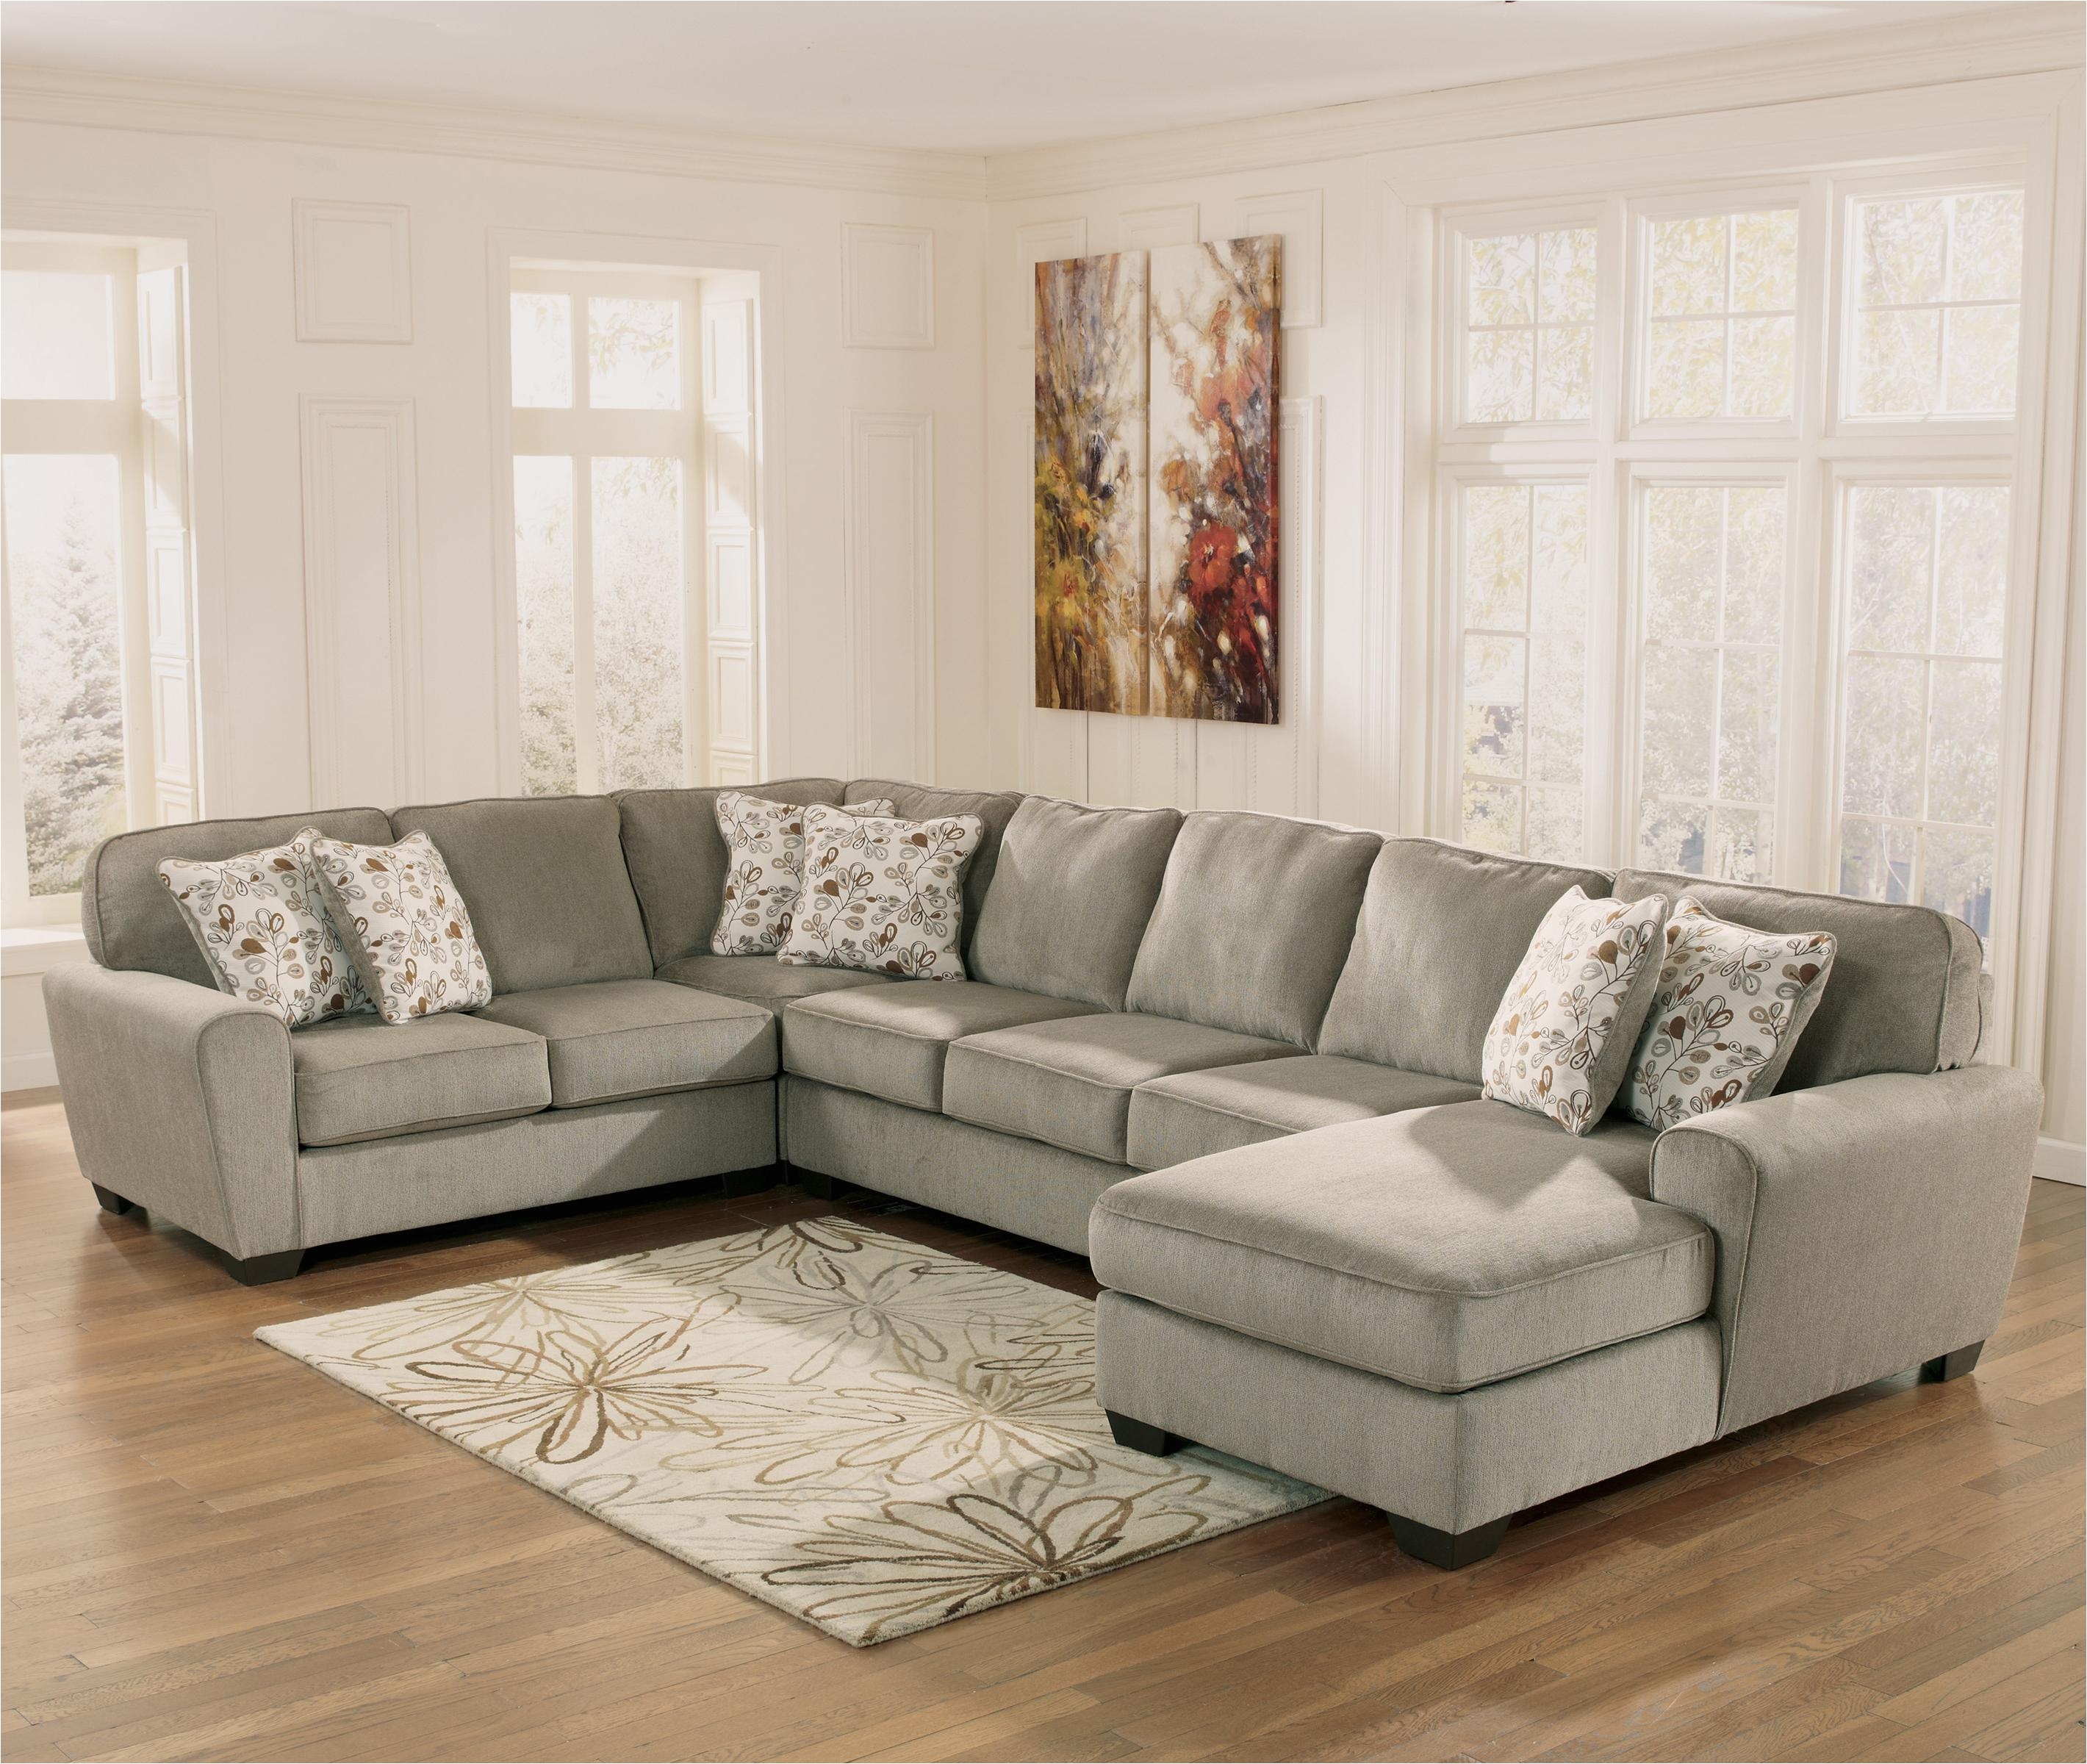 best of ashley furniture chaise sofa sofas ashley furniture gray sectional ashley sectional couch darcy